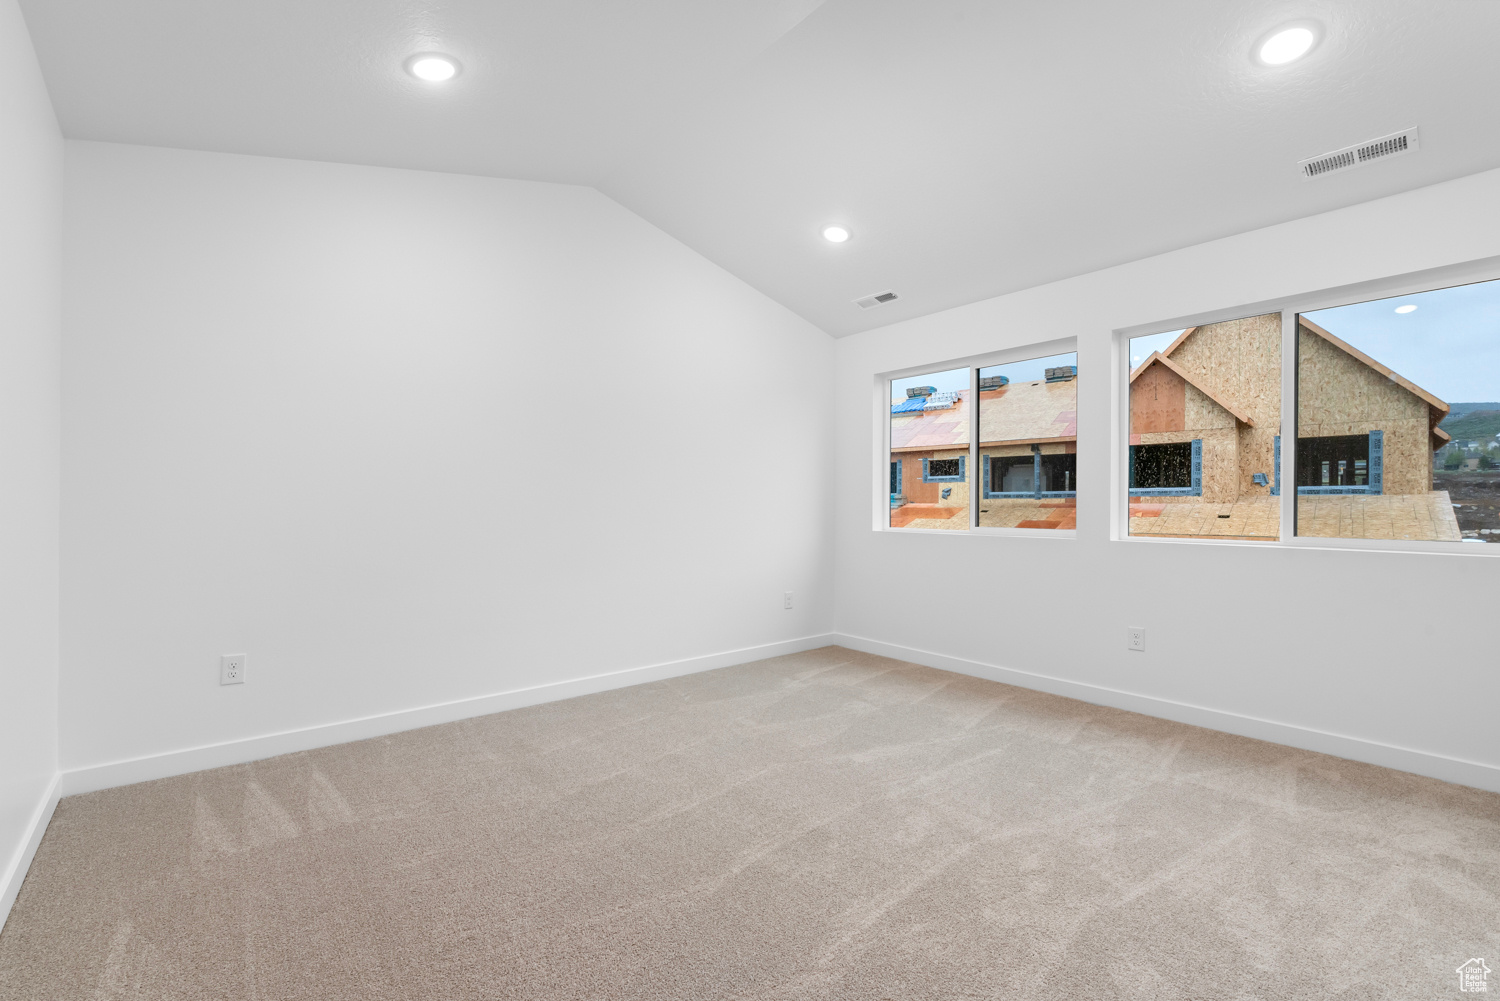 Empty room featuring vaulted ceiling and carpet